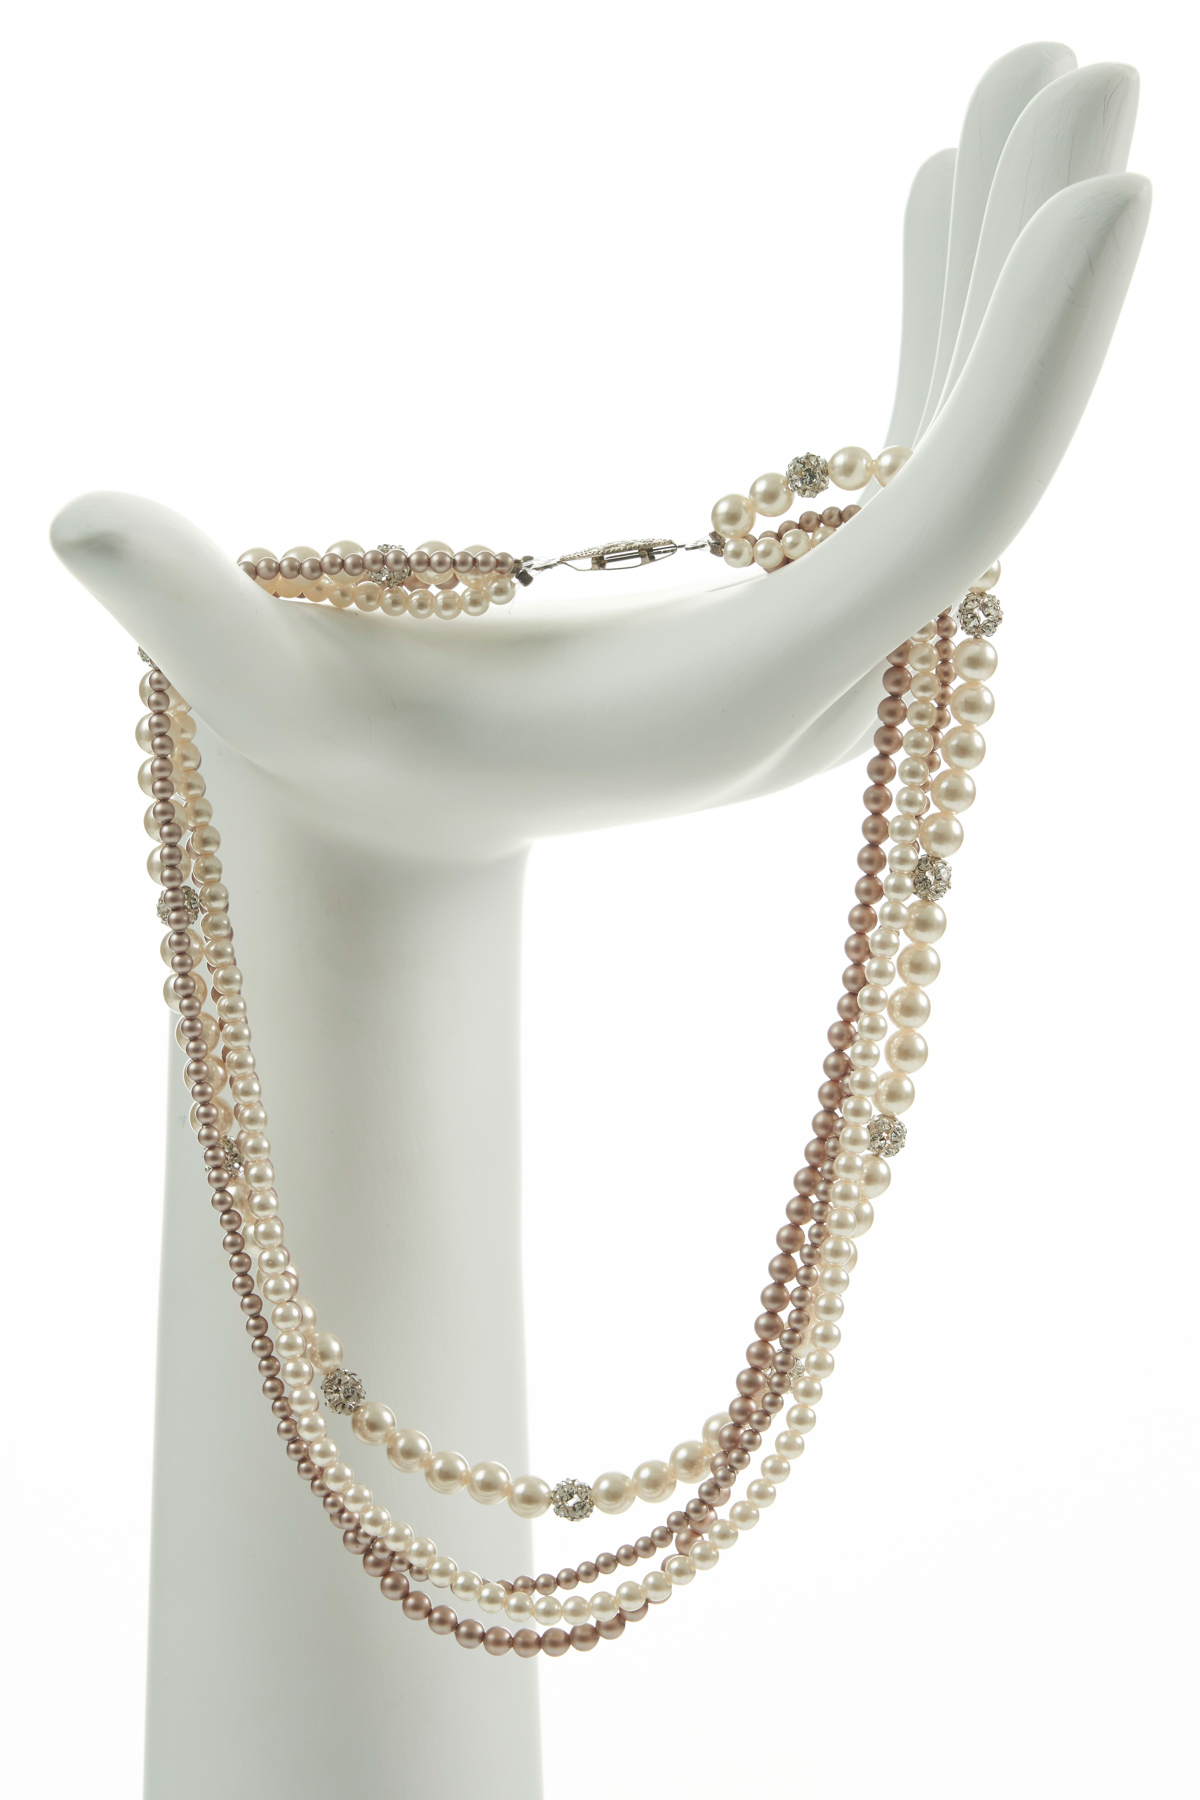 5 Designer Pearl Accessories for Young Ladies - PearlsOnly :: PearlsOnly